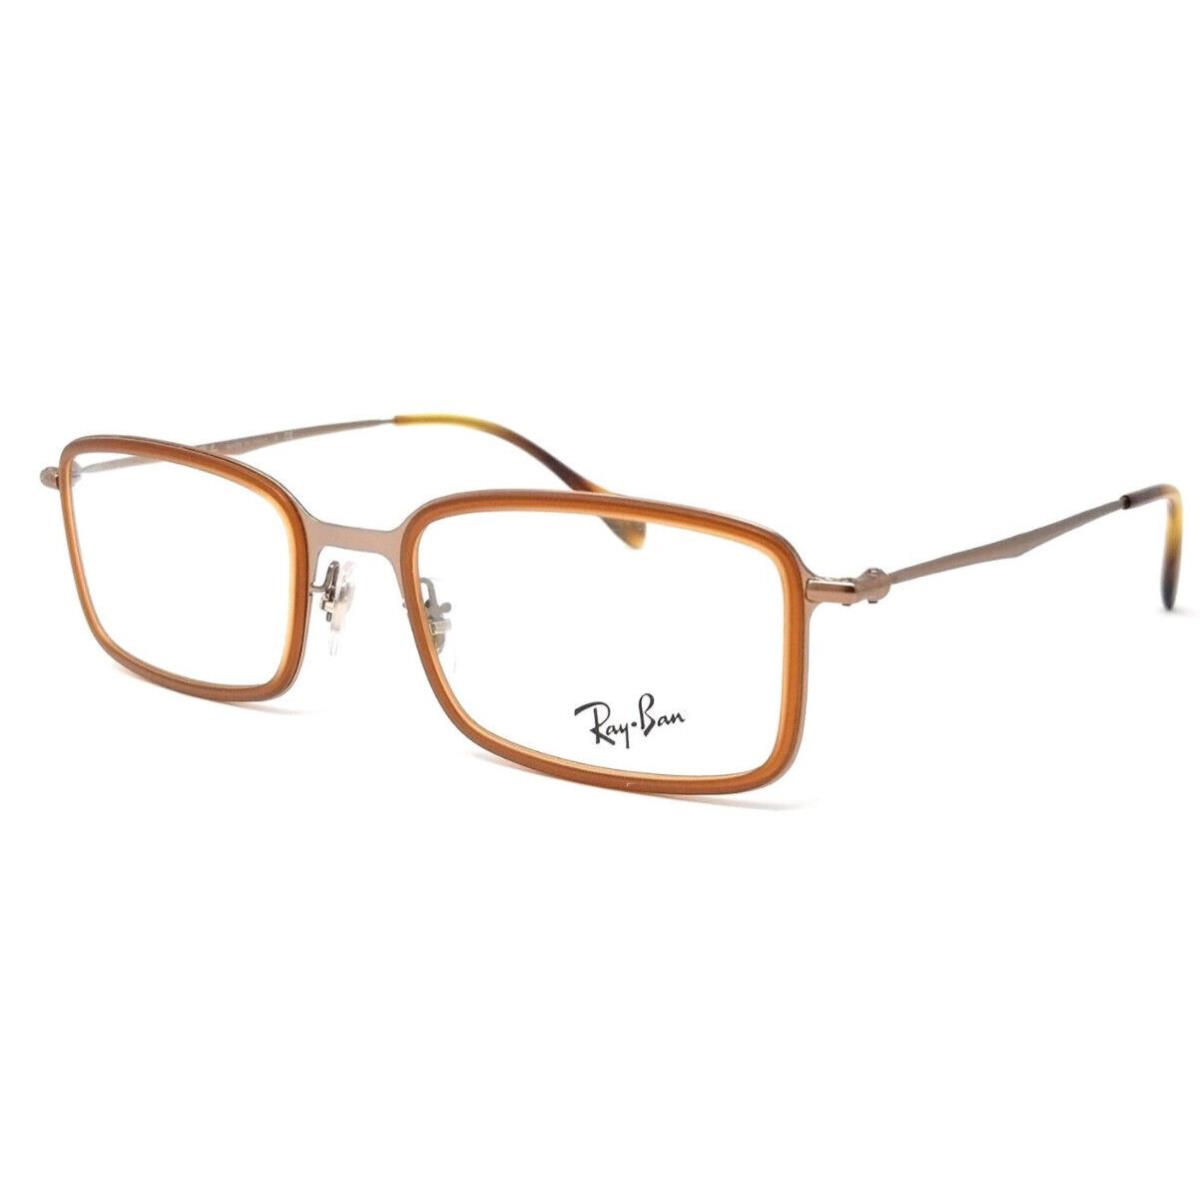 Ray Ban RB 6298 2811 Brown Unisex Eyeglasses 51mm 19 140 Italy